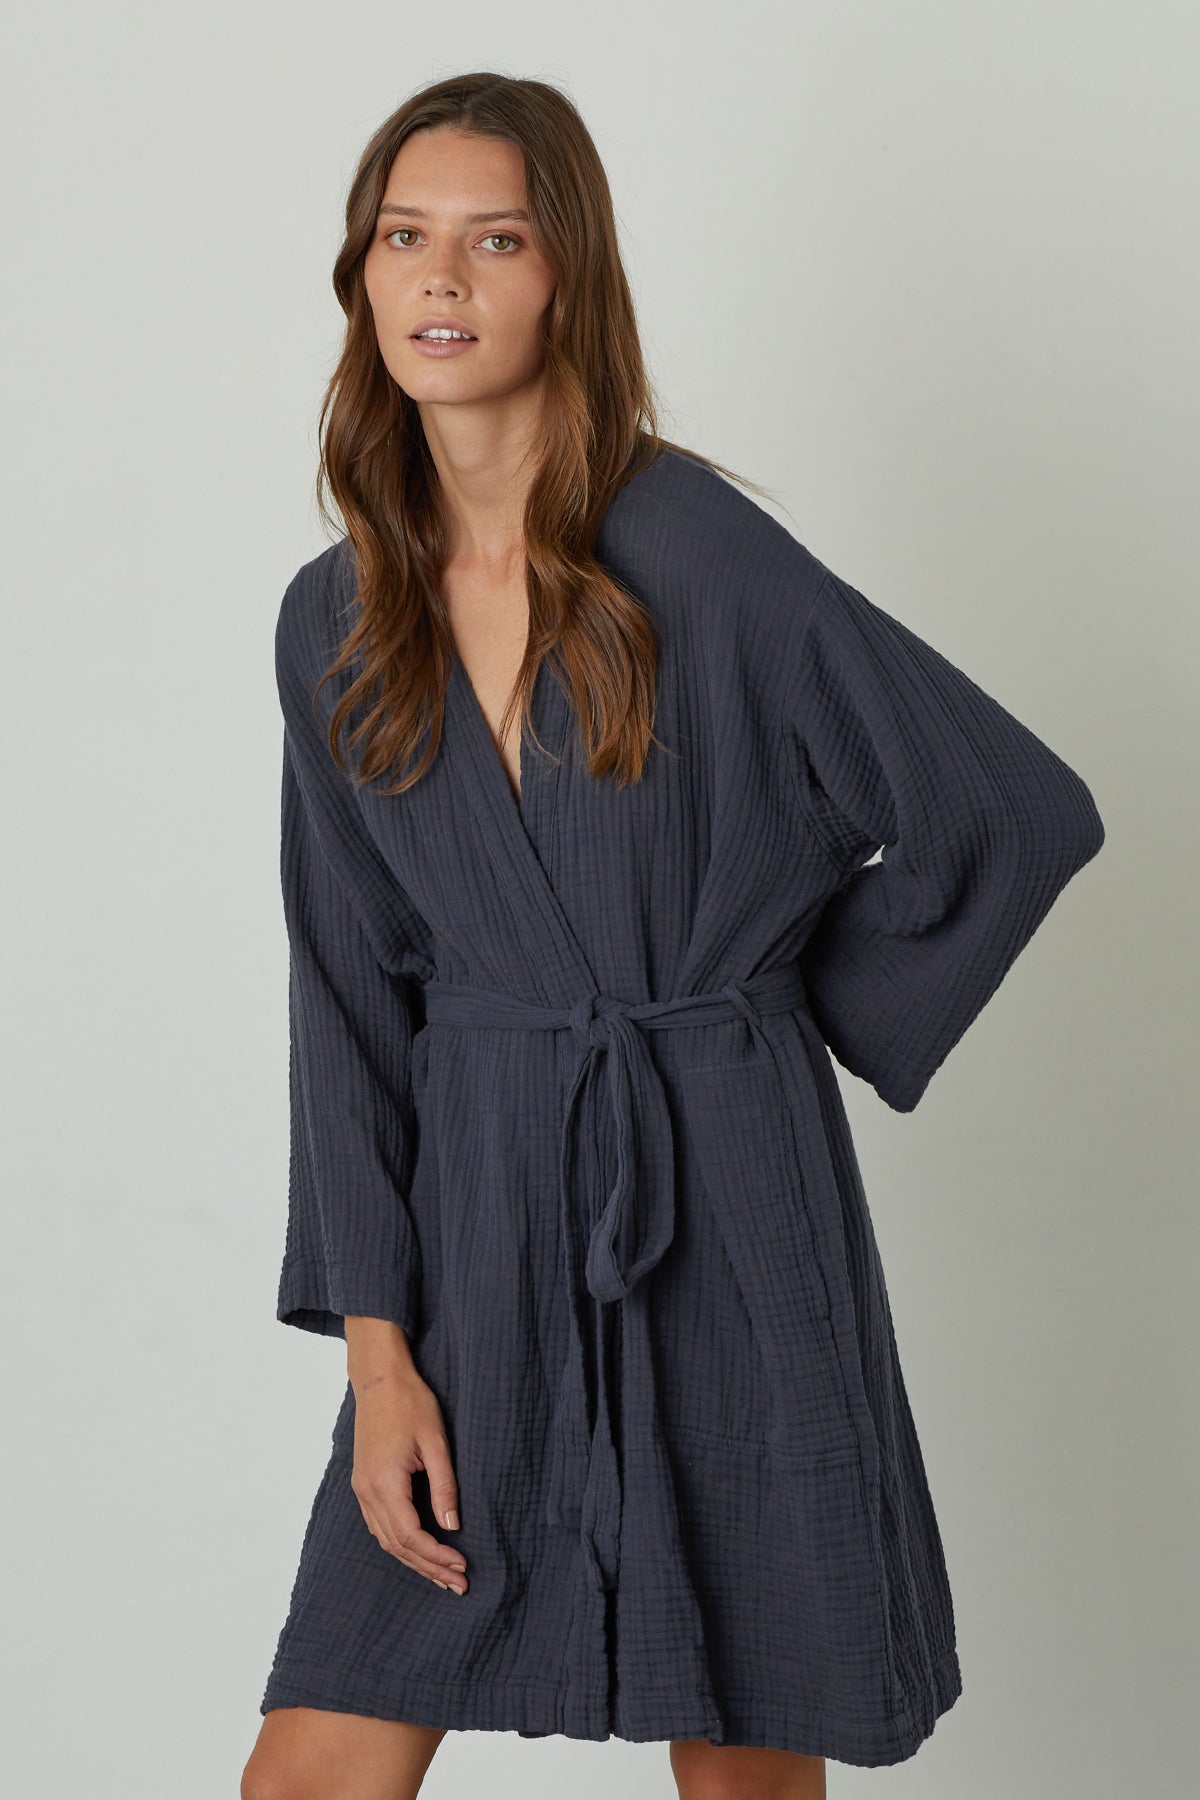 A woman wearing a soft-textured MINI COTTON GAUZE ROBE from Jenny Graham Home with a belt.-23556069228737